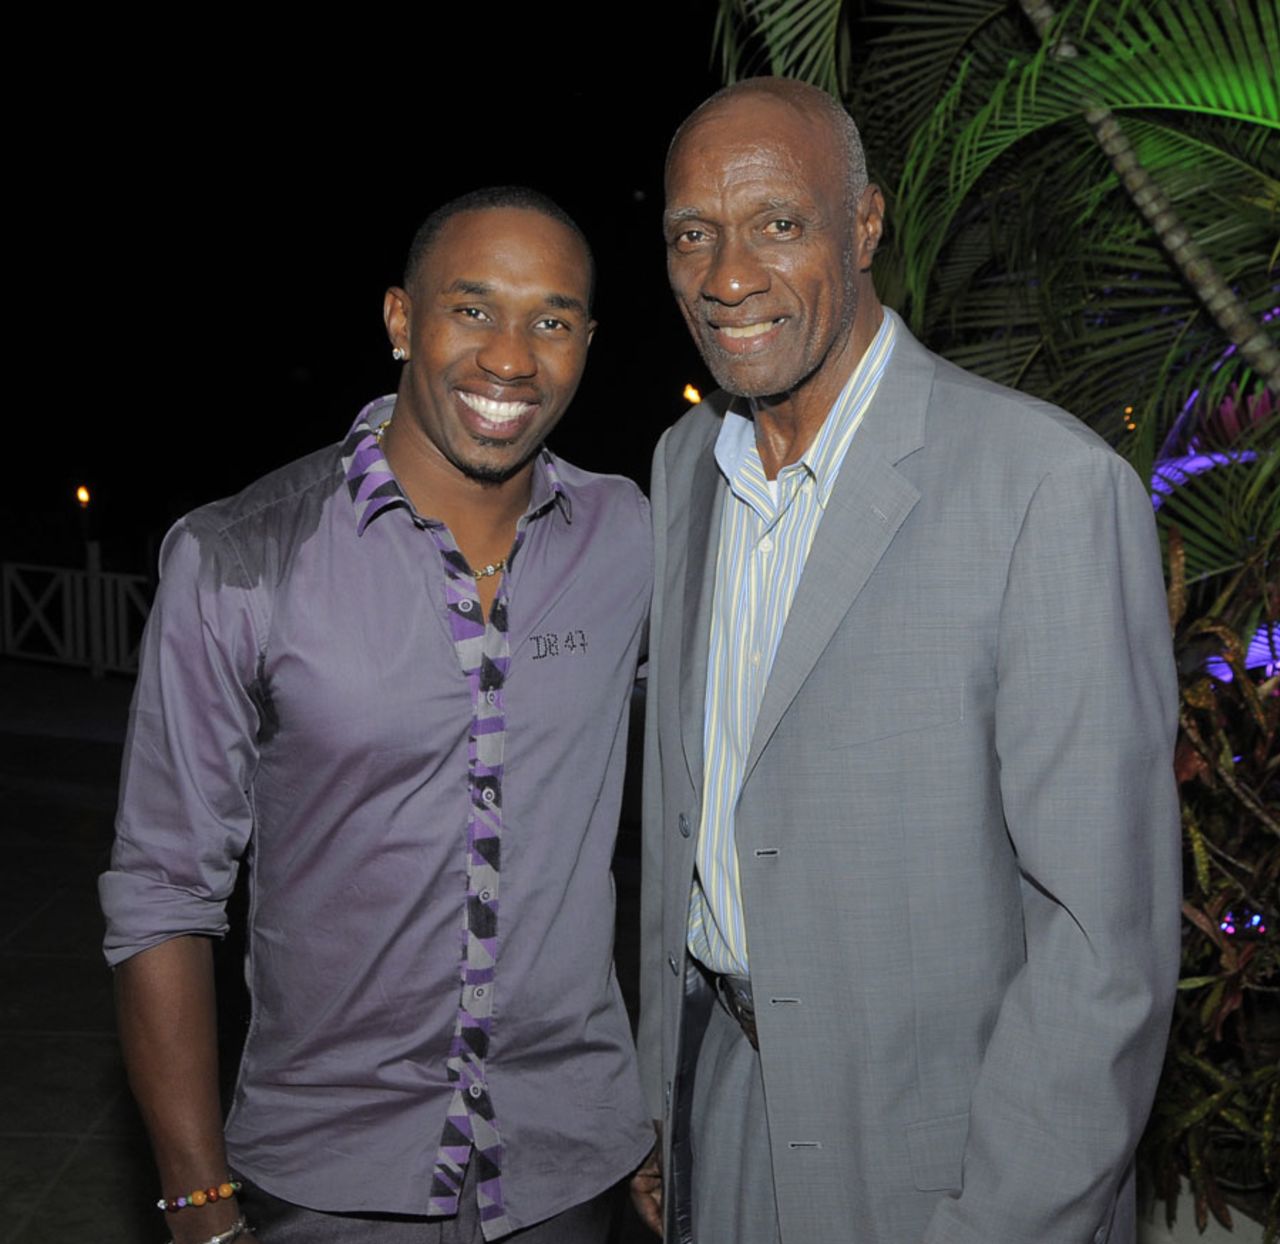 Dwayne Bravo poses with Sir Wes Hall, Caribbean Premier League, March 16, 2013